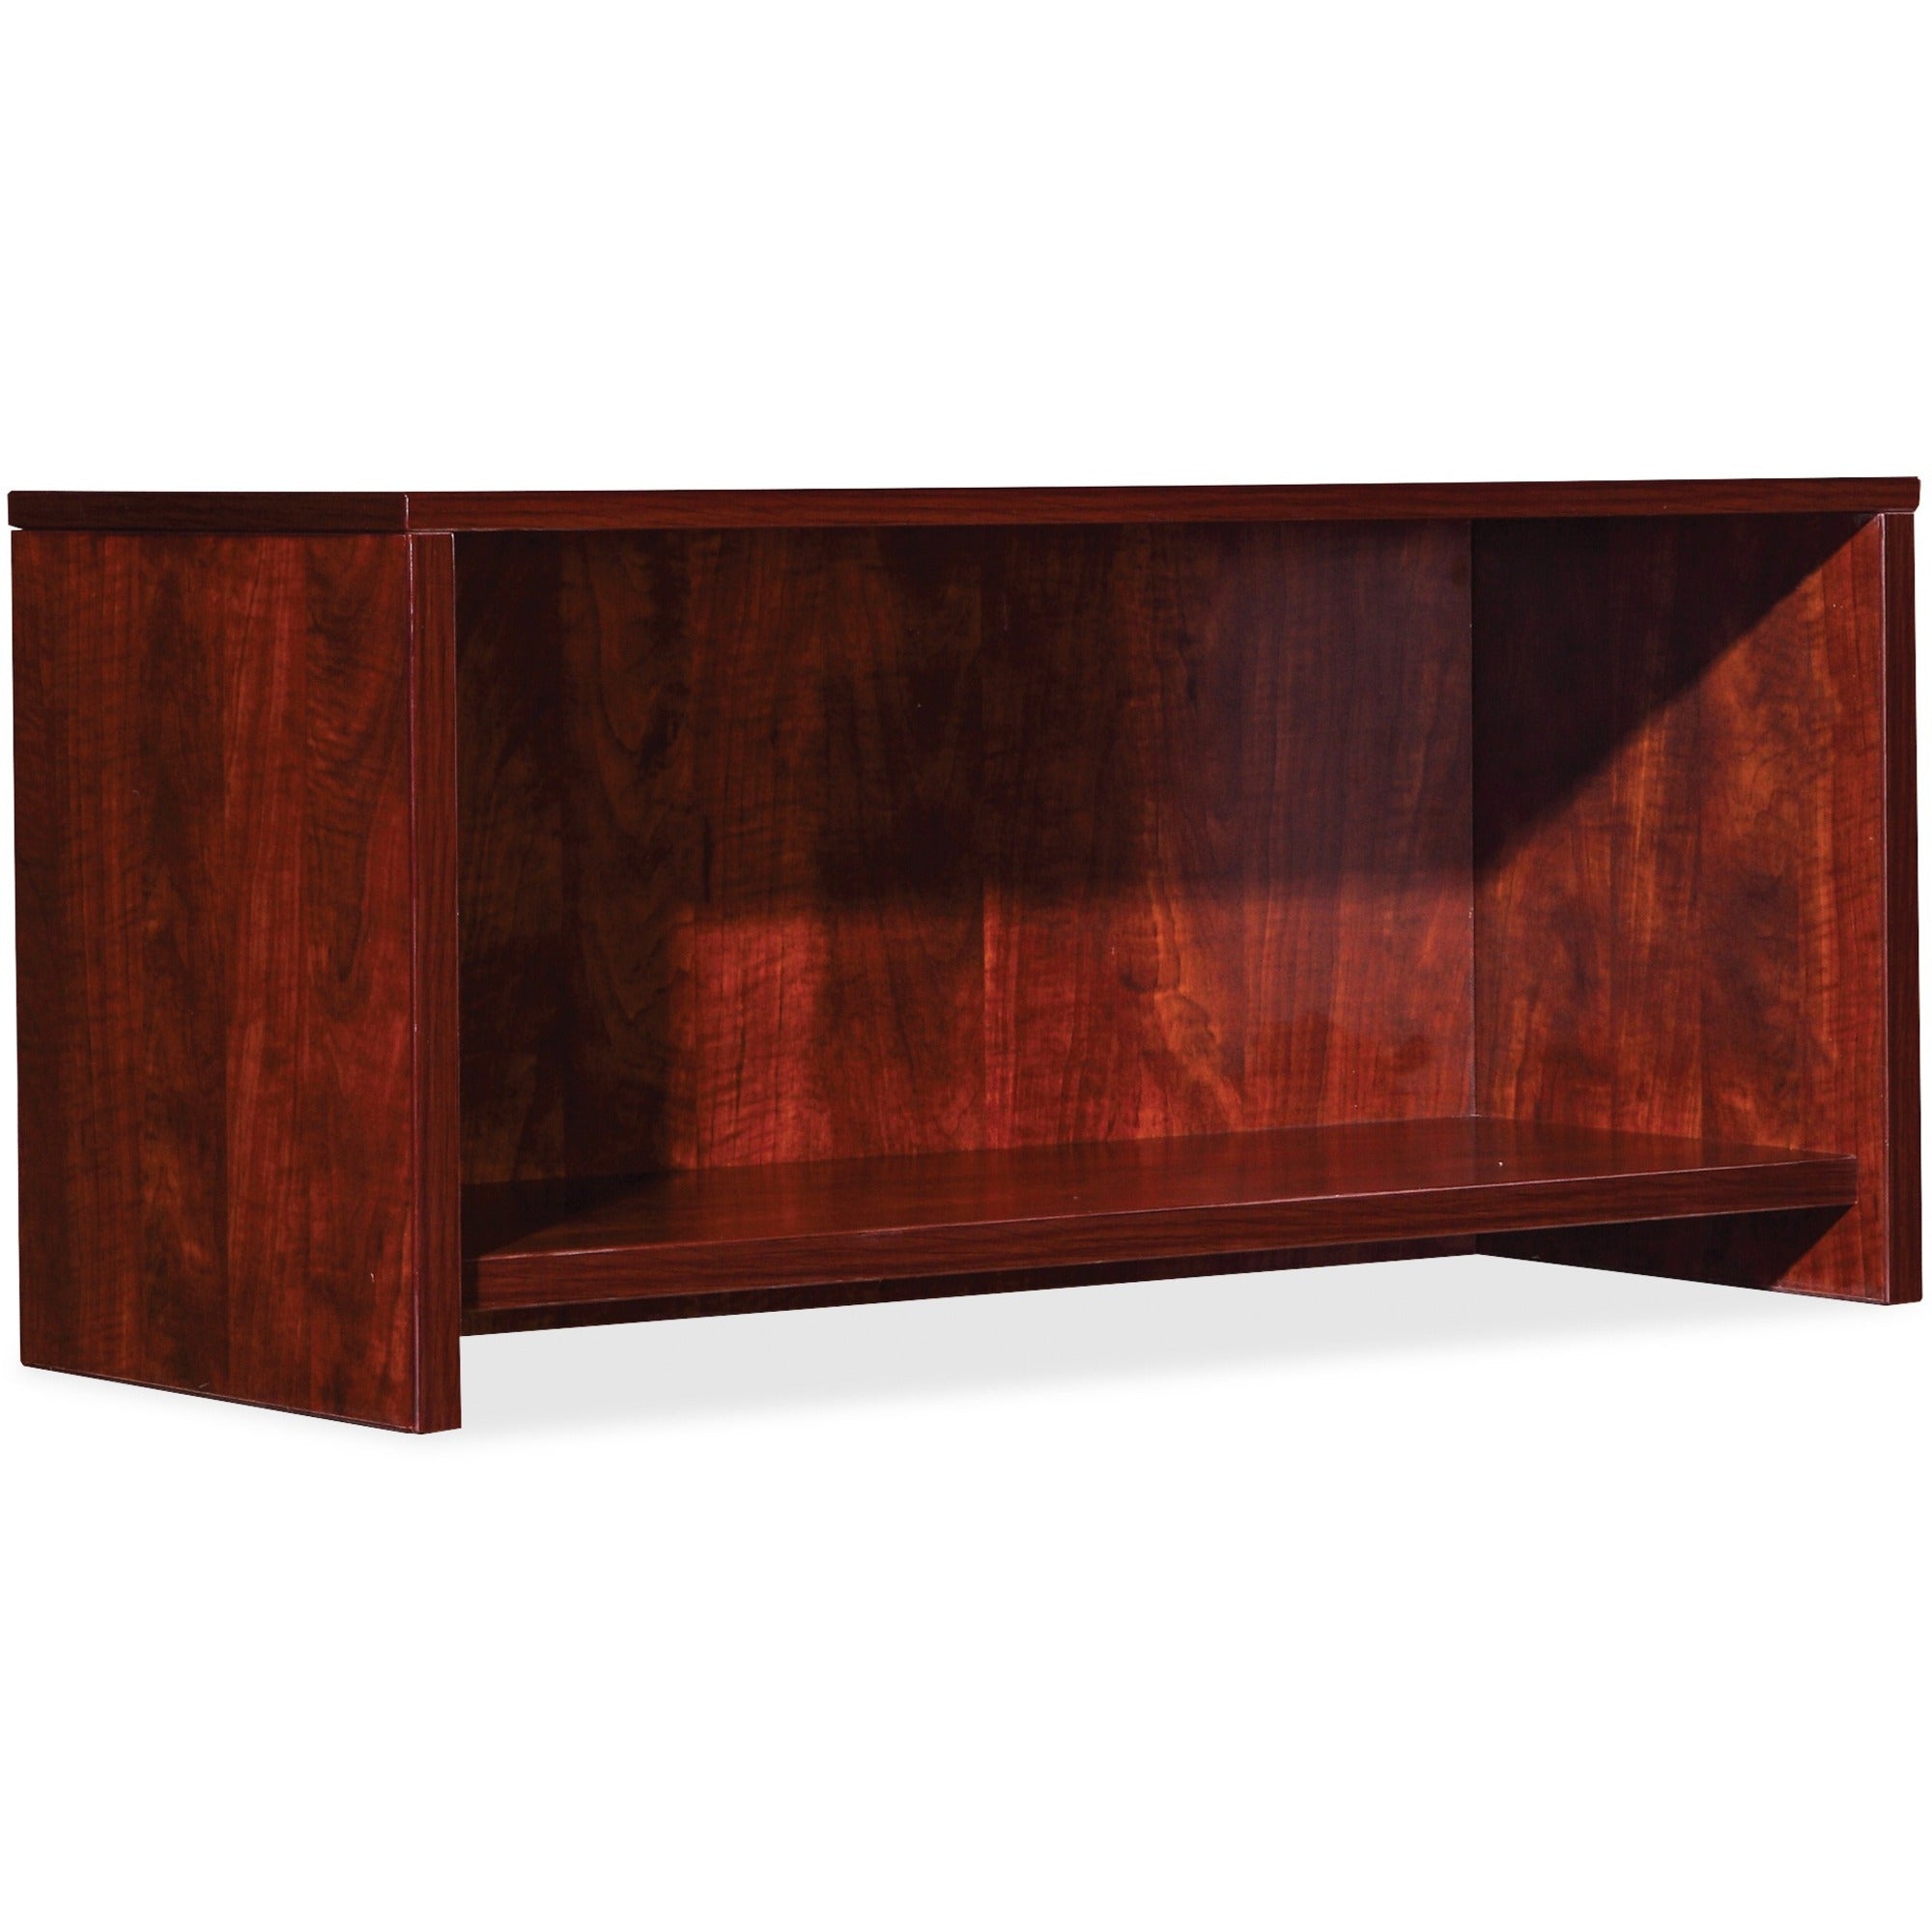 Lorell Essentials Series Wall-Mount Hutch - 35.4" x 14.8"16.8" Hutch, 1" Side Panel, 0.6" Back Panel, 0.7" Panel, 1" Bottom Shelf - Finish: Cherry - Back Panel, Edge Banding - For Office - 